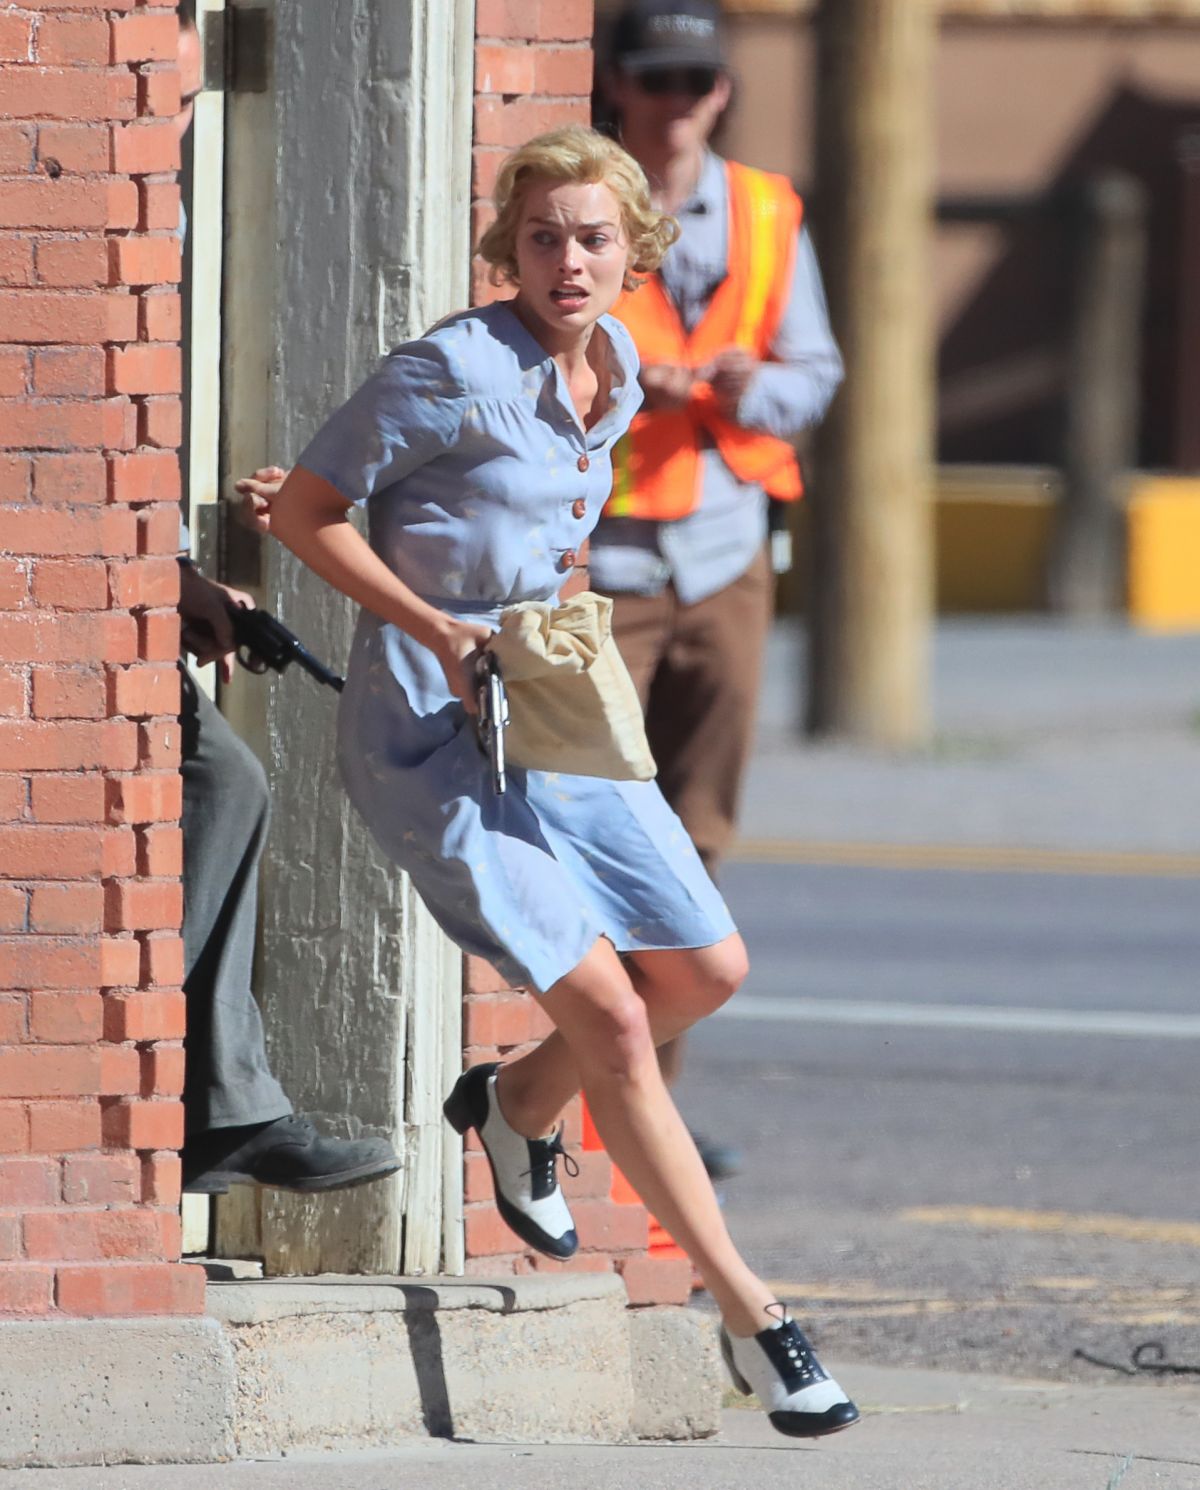 margot-robbie-on-the-set-of-dreamland-in-new-mexico-10-26-2017-6.jpg